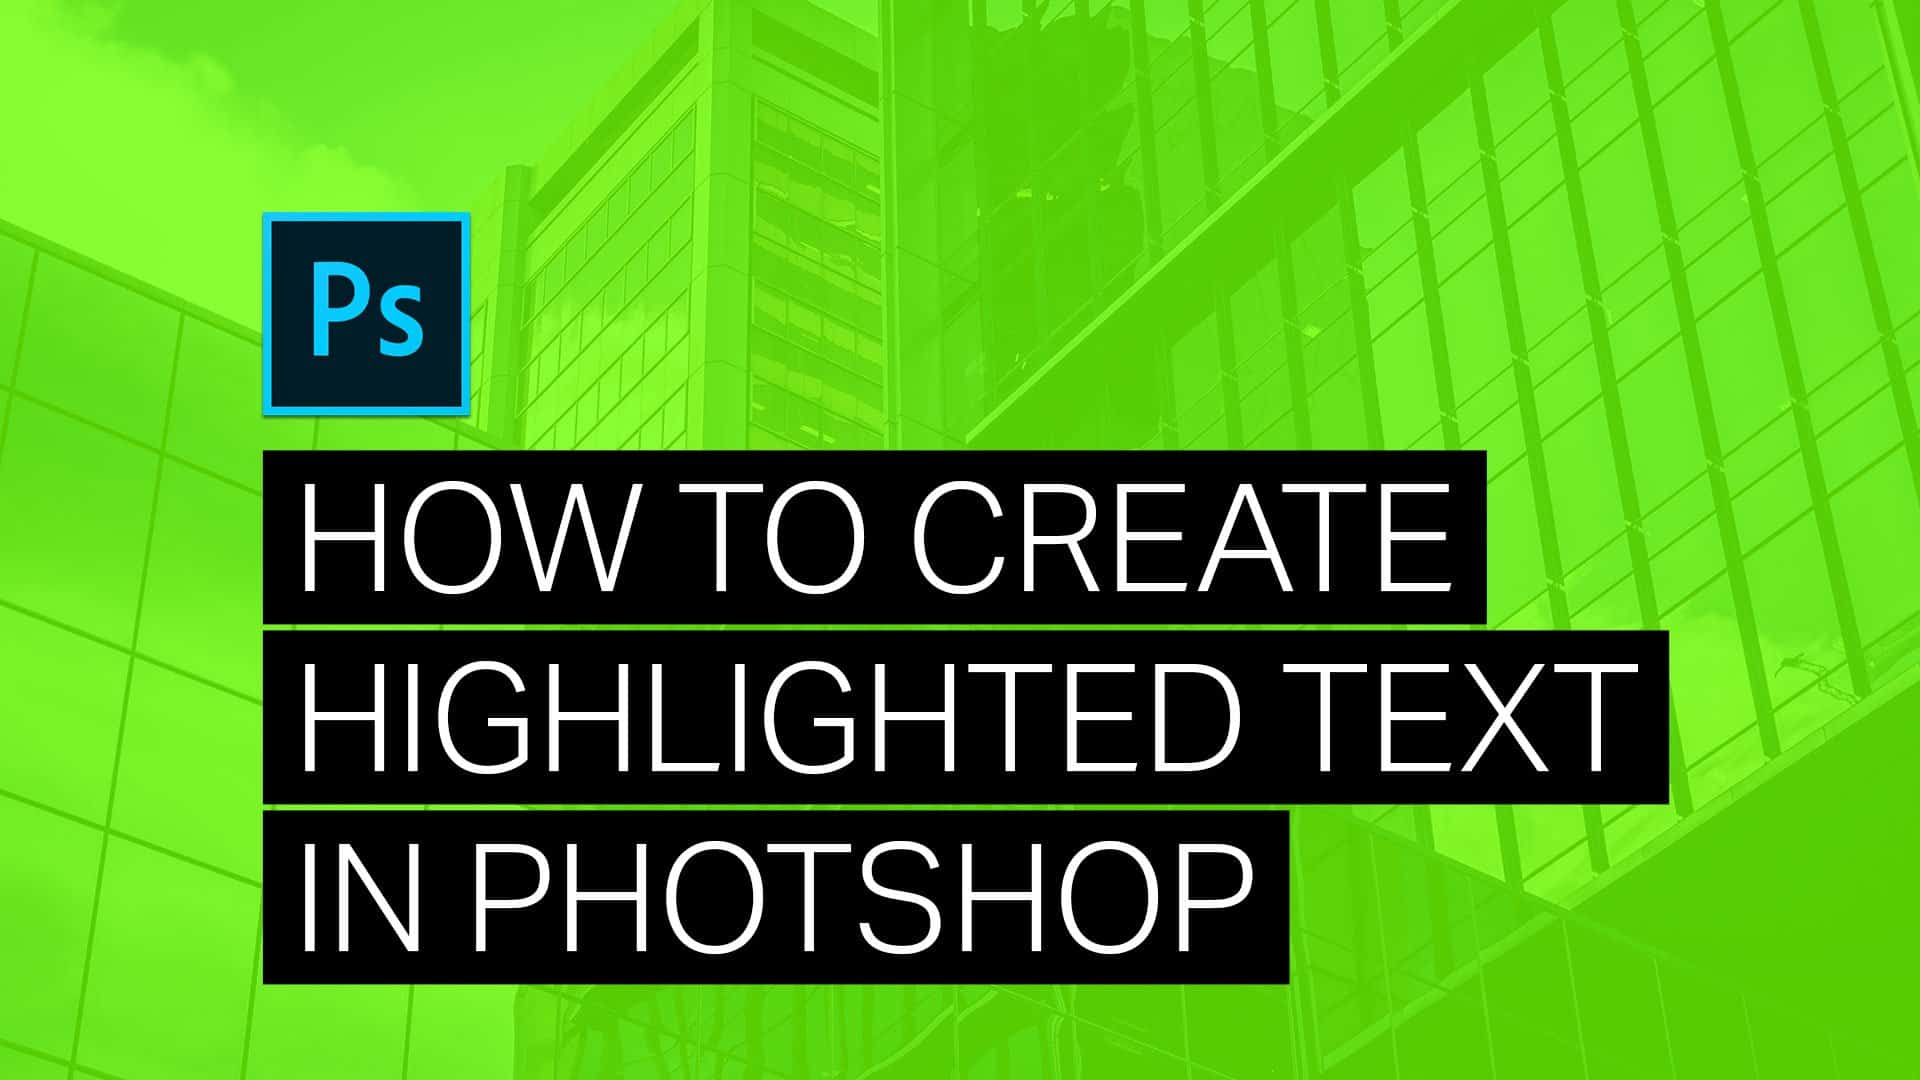 How to Create Highlighted Text in Photoshop